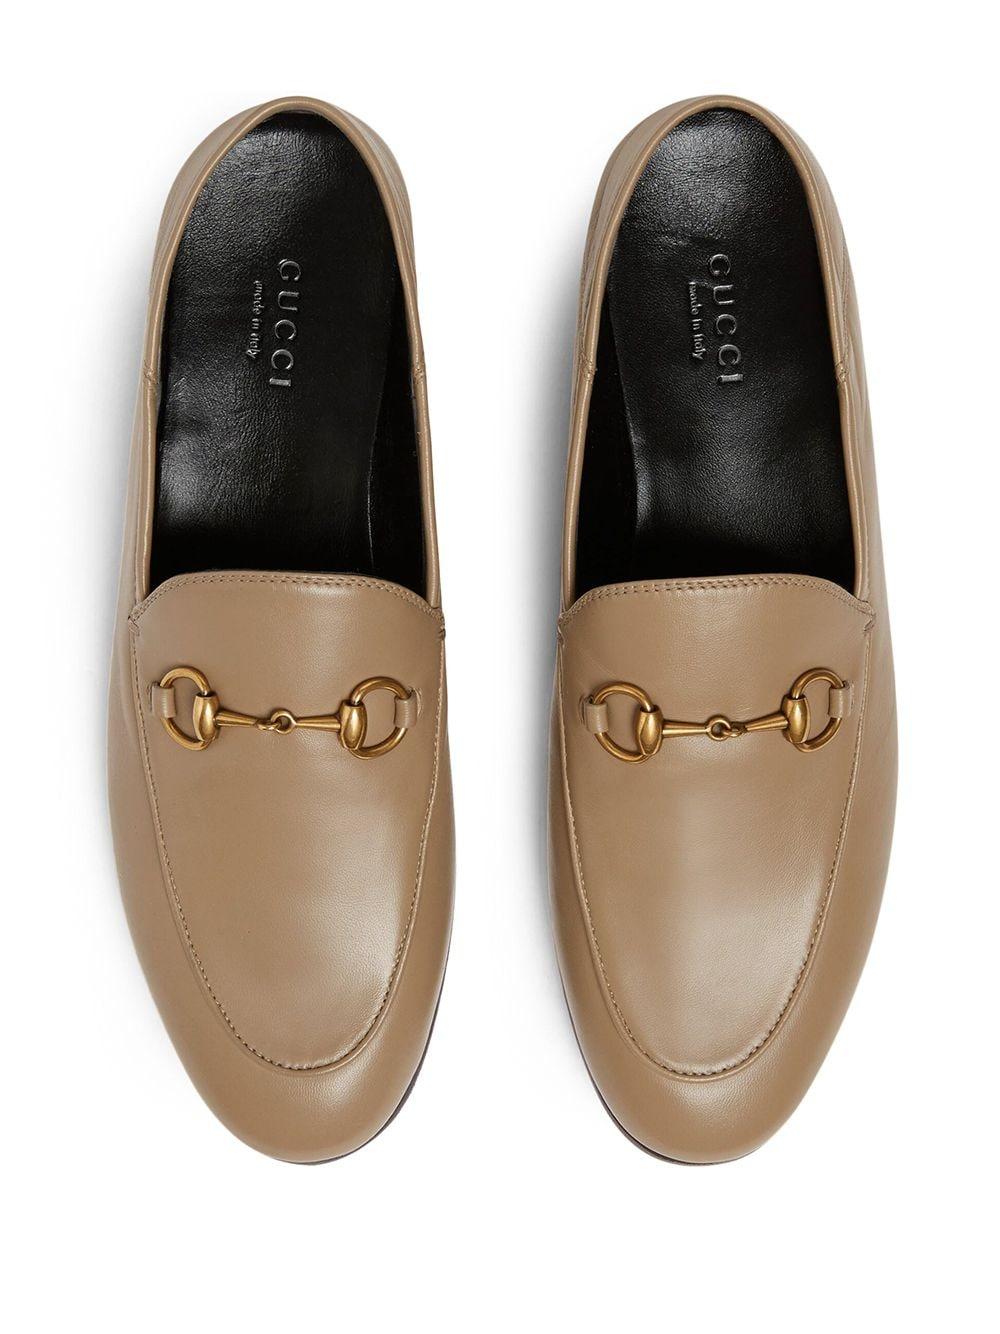 Gucci Brixton Horsebit Leather Loafer | Lyst